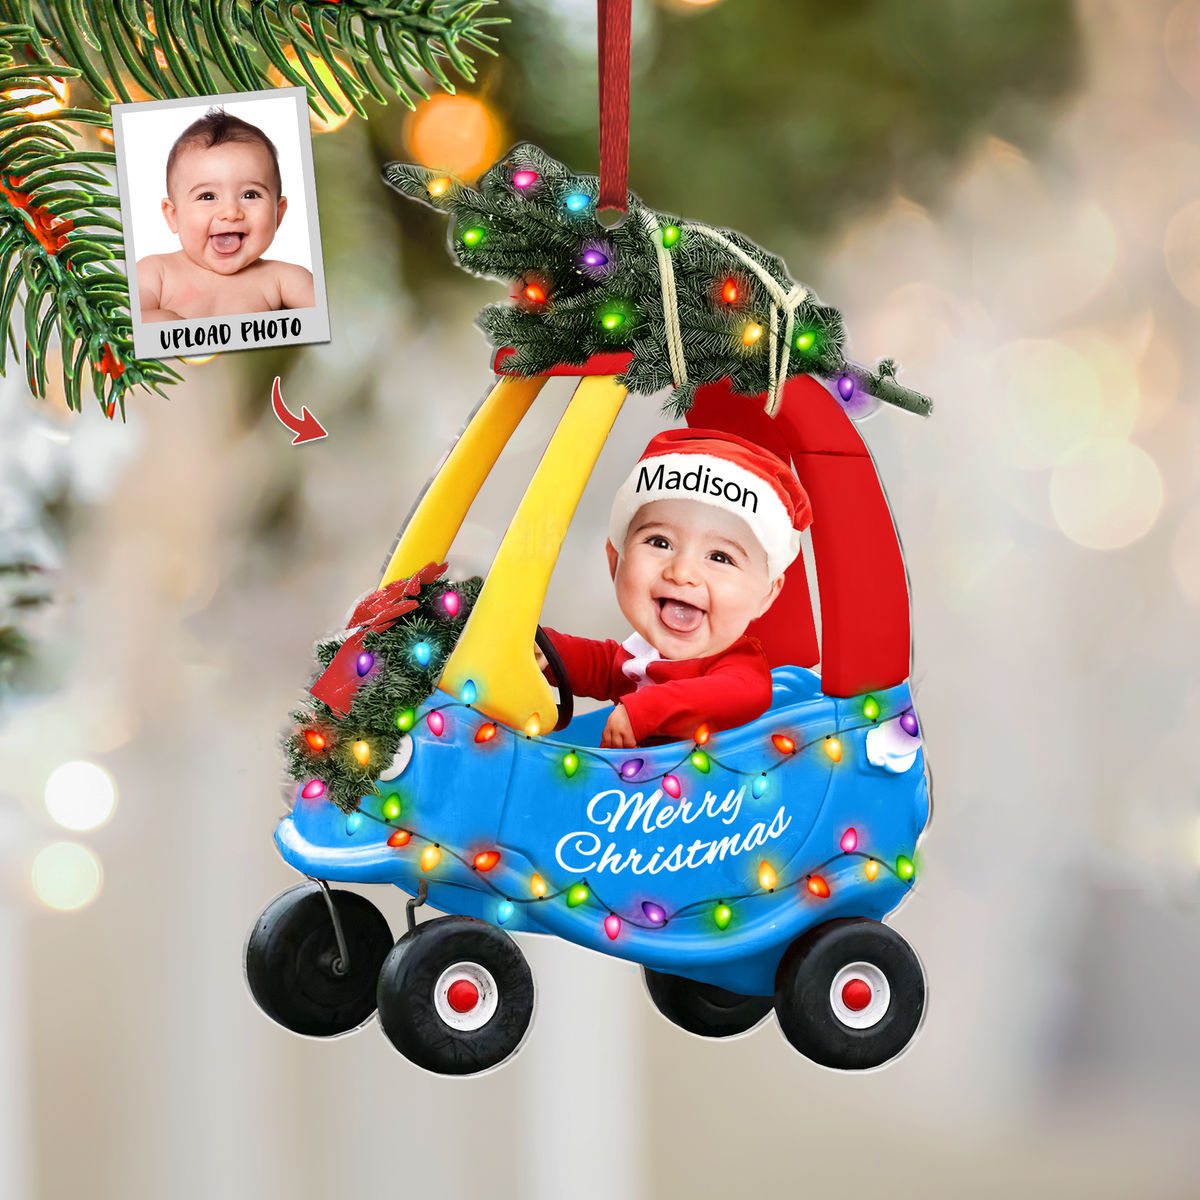 Photo Ornament - Adorable Newborn Baby - Baby Christmas - Custom Ornament from Photo - Christmas Gifts For Dad, Mom, Family_1